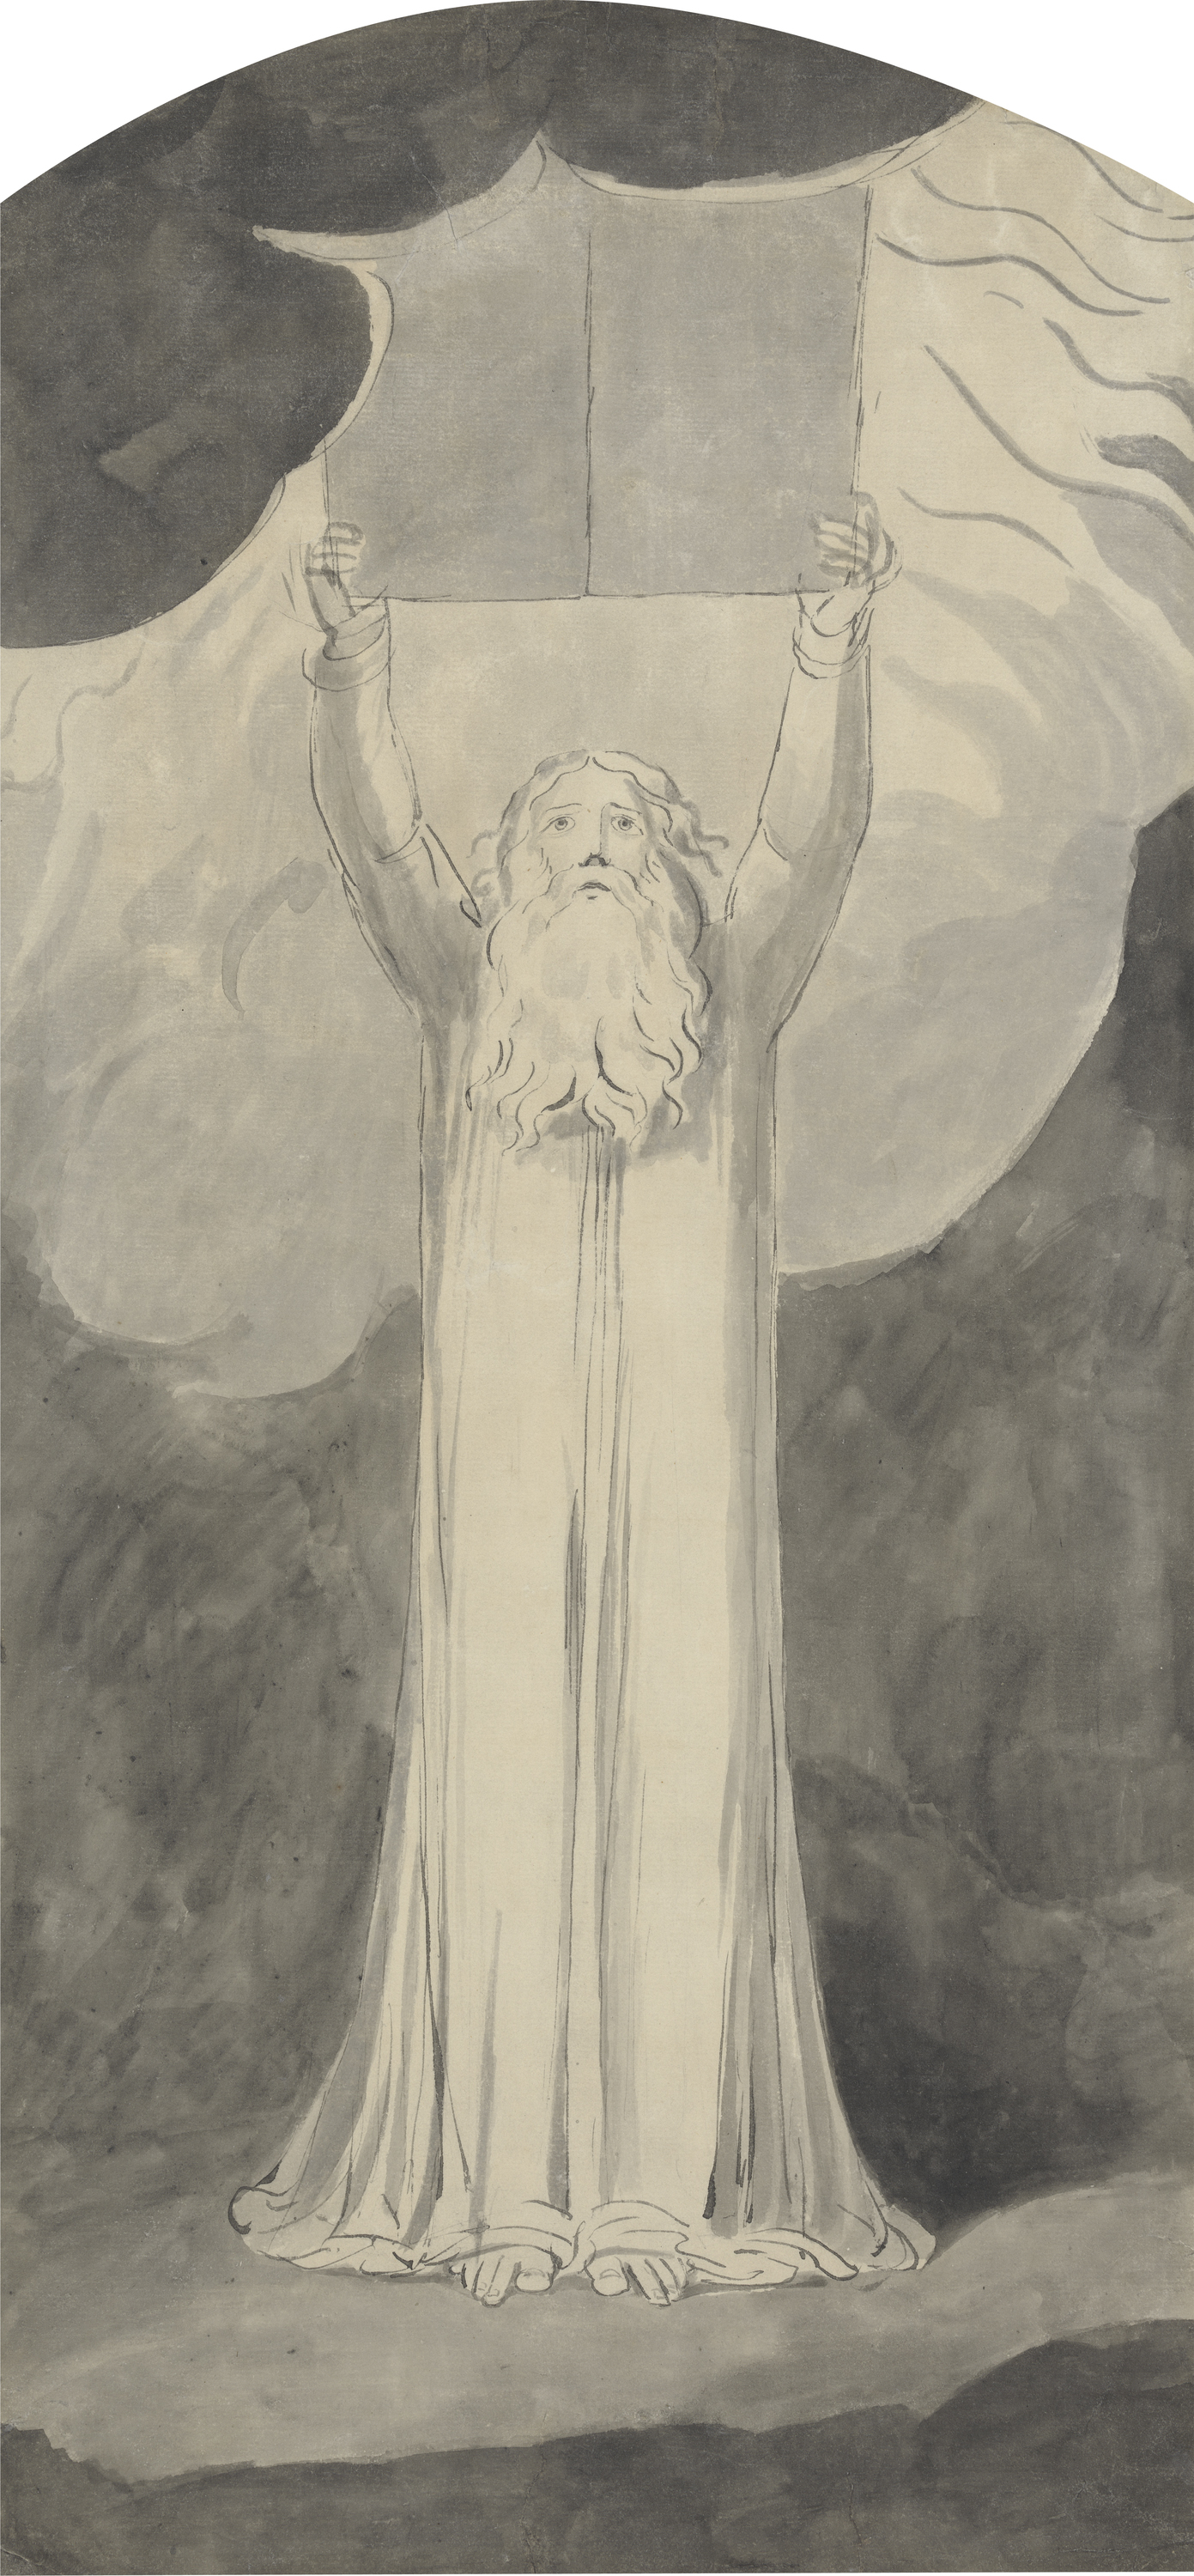 A tonal black and white drawing of a light-skinned Moses with a flowing white beart and dressed in long robes with his arms raised holding two stone tablets.